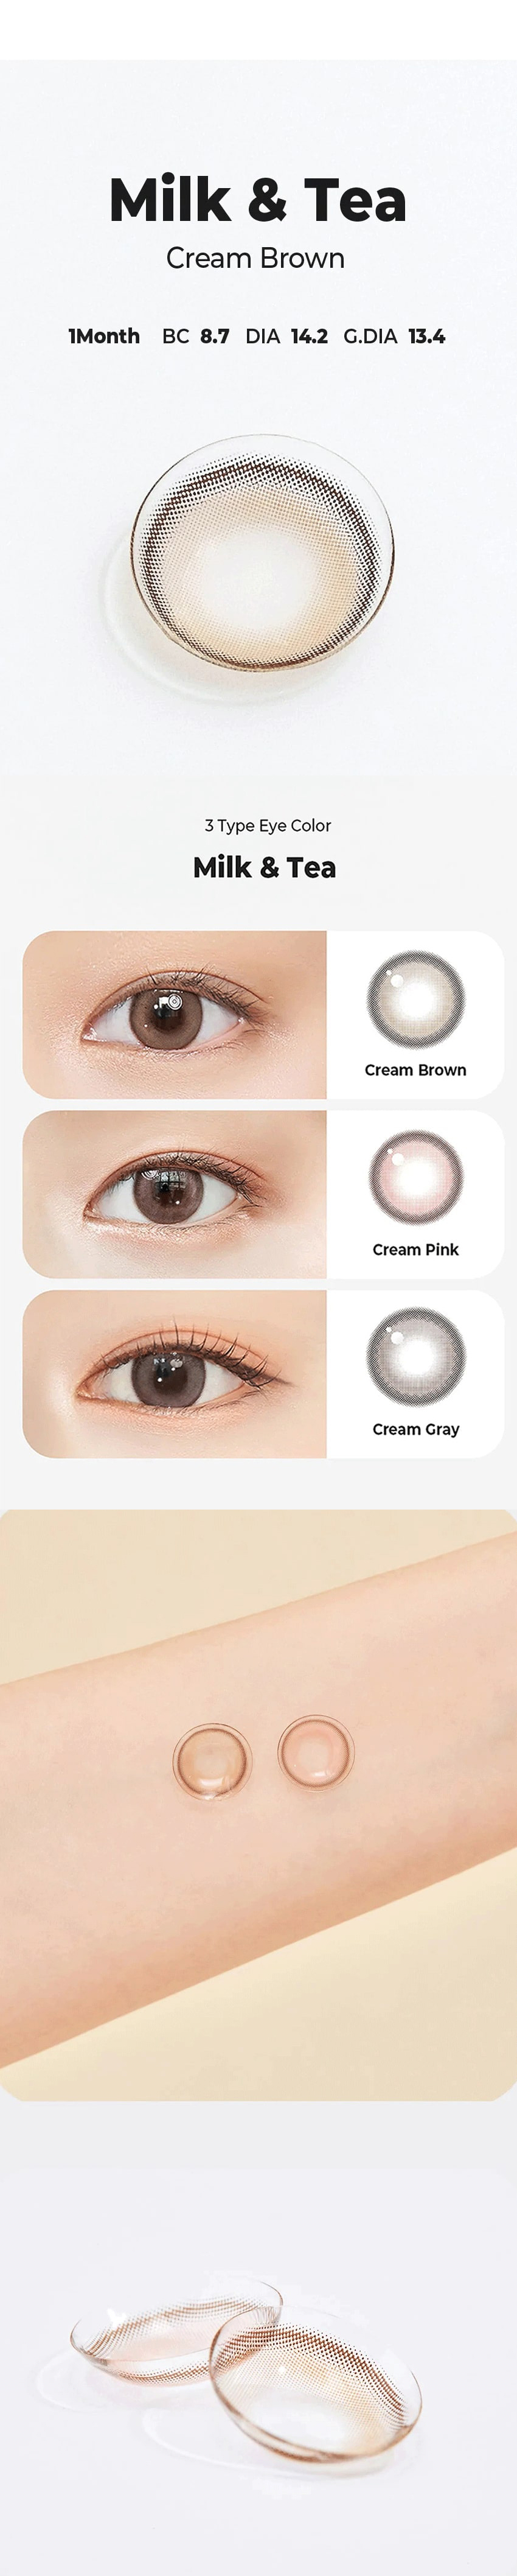 chuu, korean colored contacts, sns popular, new product, event product, brown,cream,cream,brown contacts